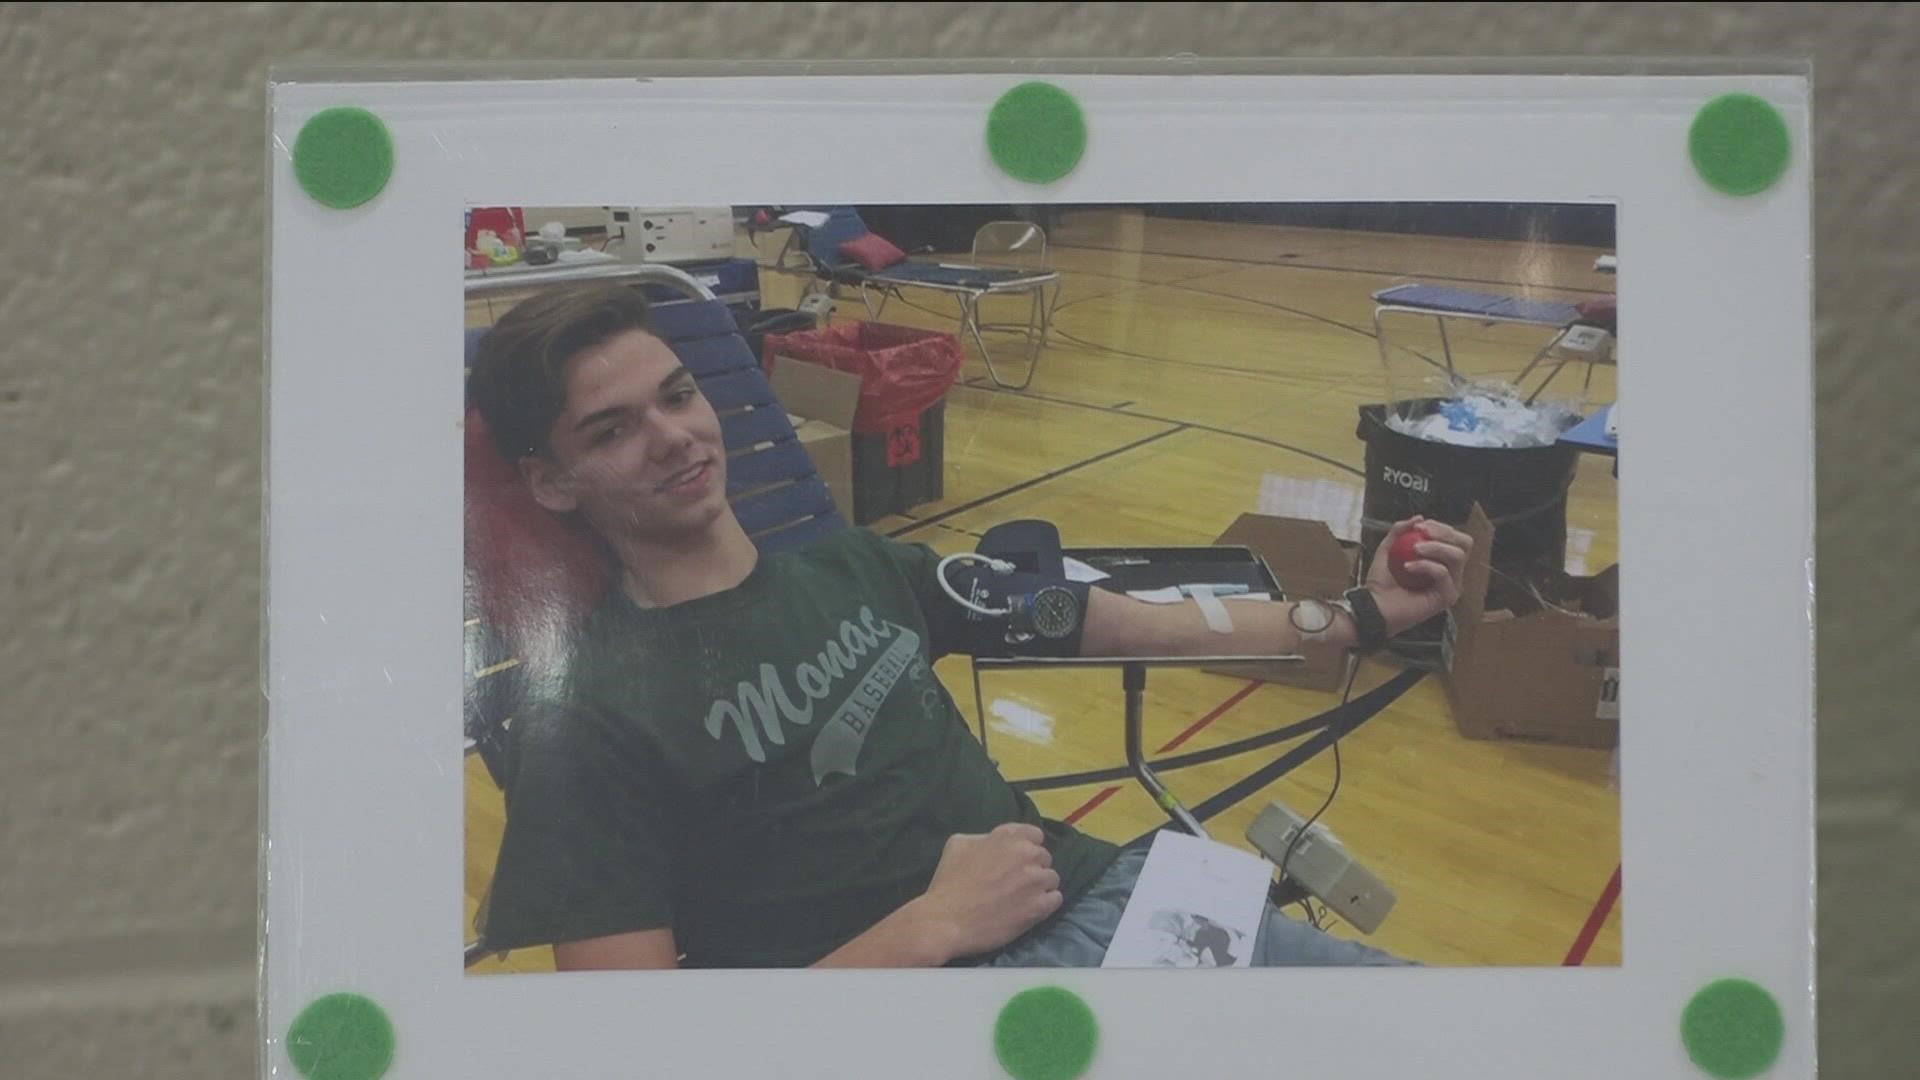 The Joshua Sorrell Blood Drive has been taking place for the past 6 years to honor the 16-year-old who died in the vacant north Toledo building.